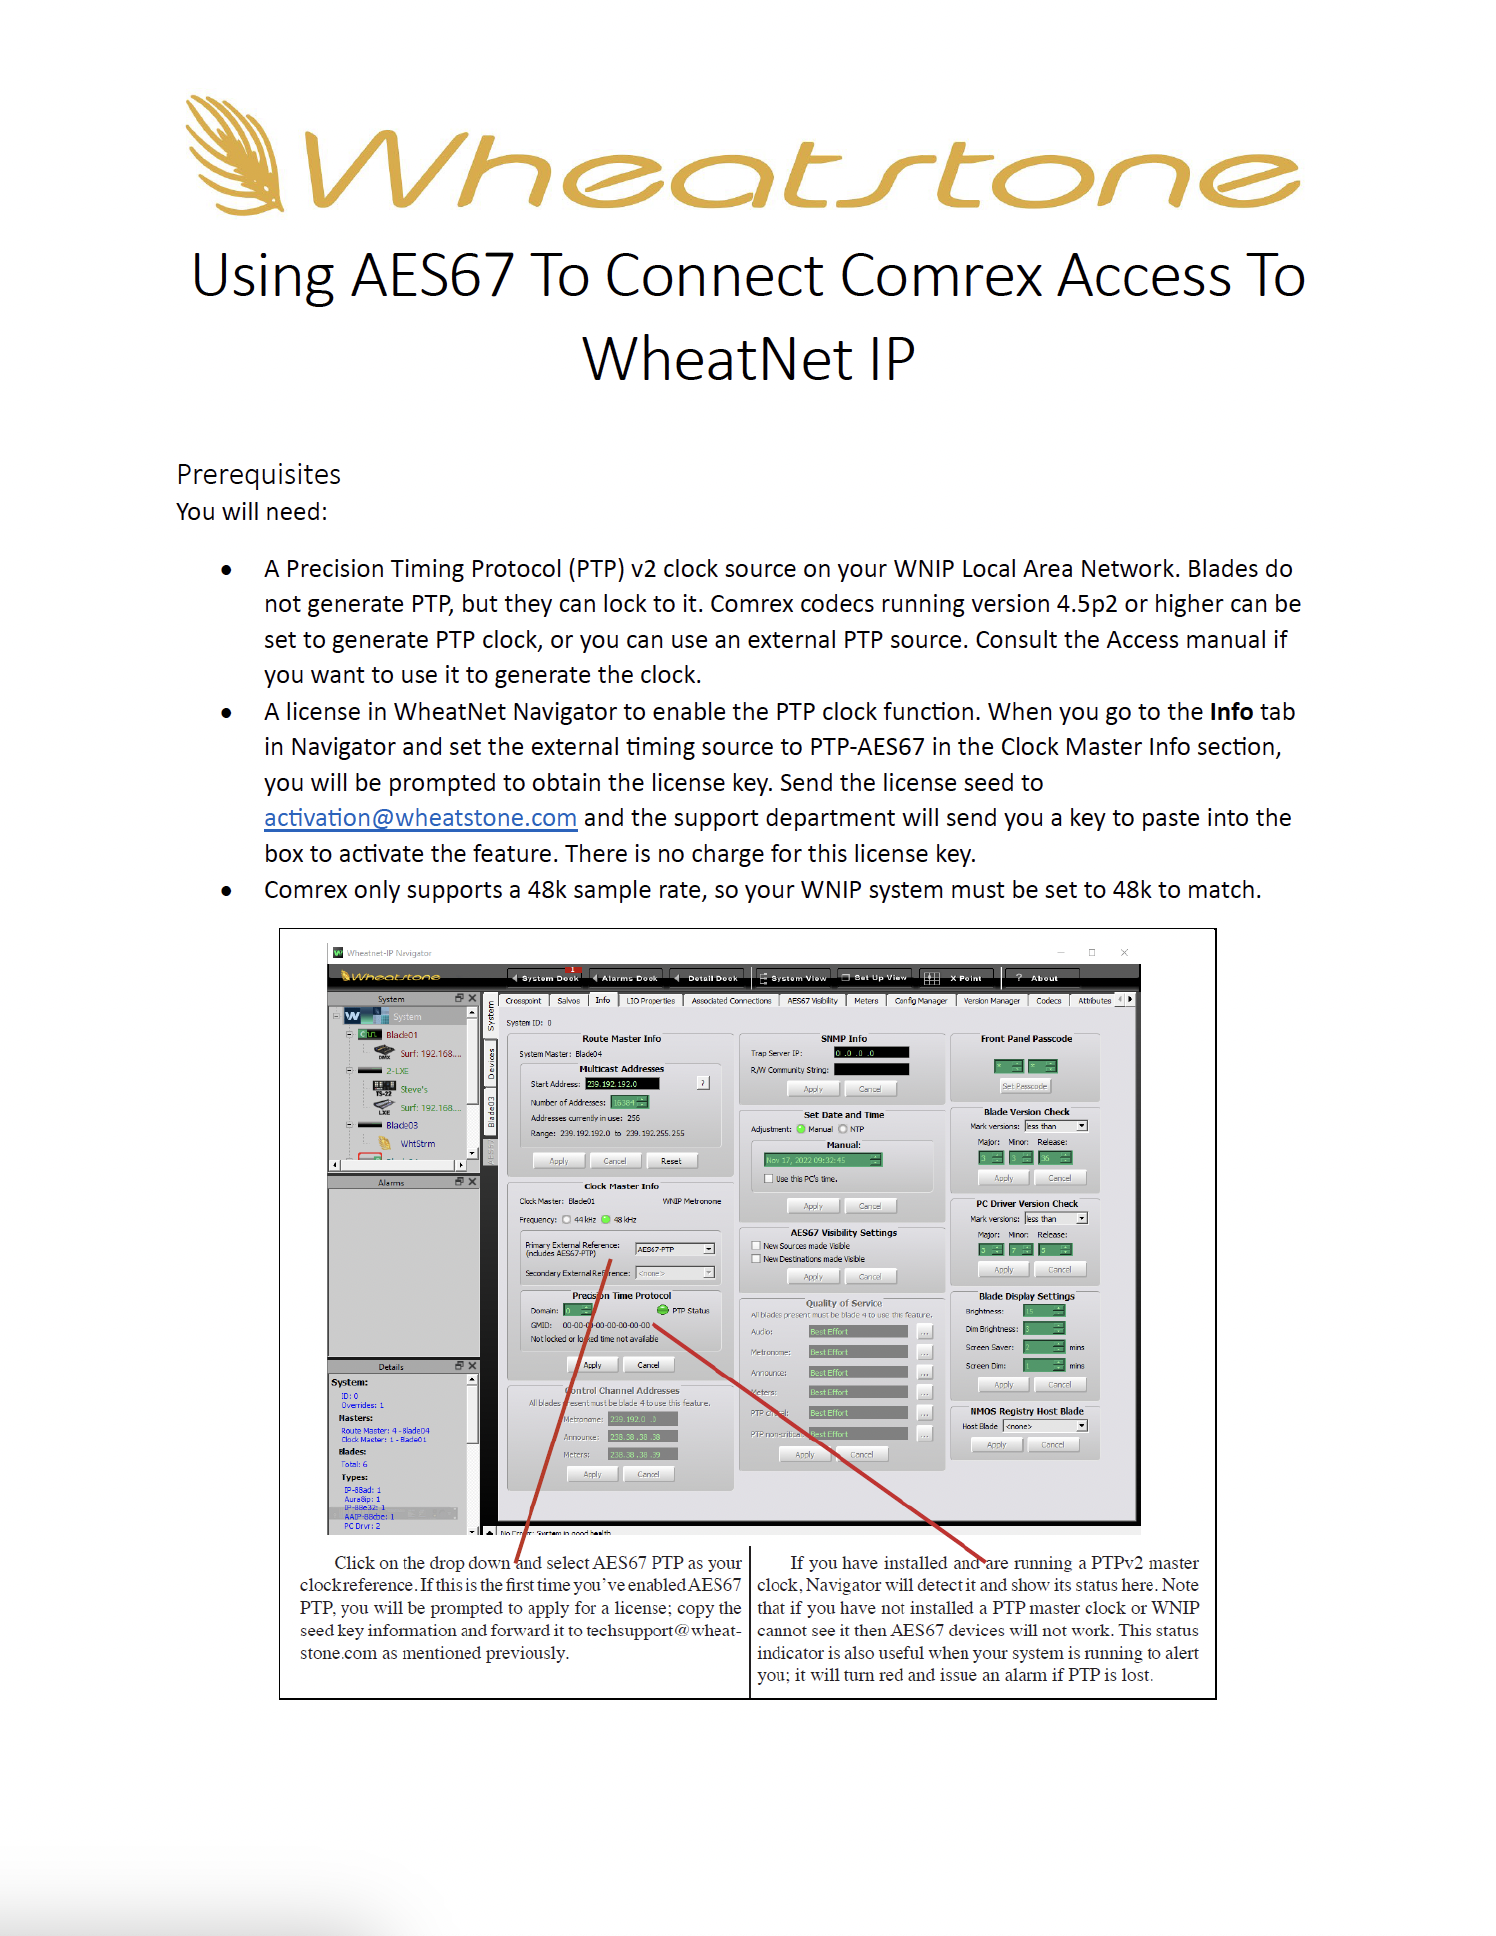 Using AES67 To Connect Comrex Access Rack To WheatNet IP